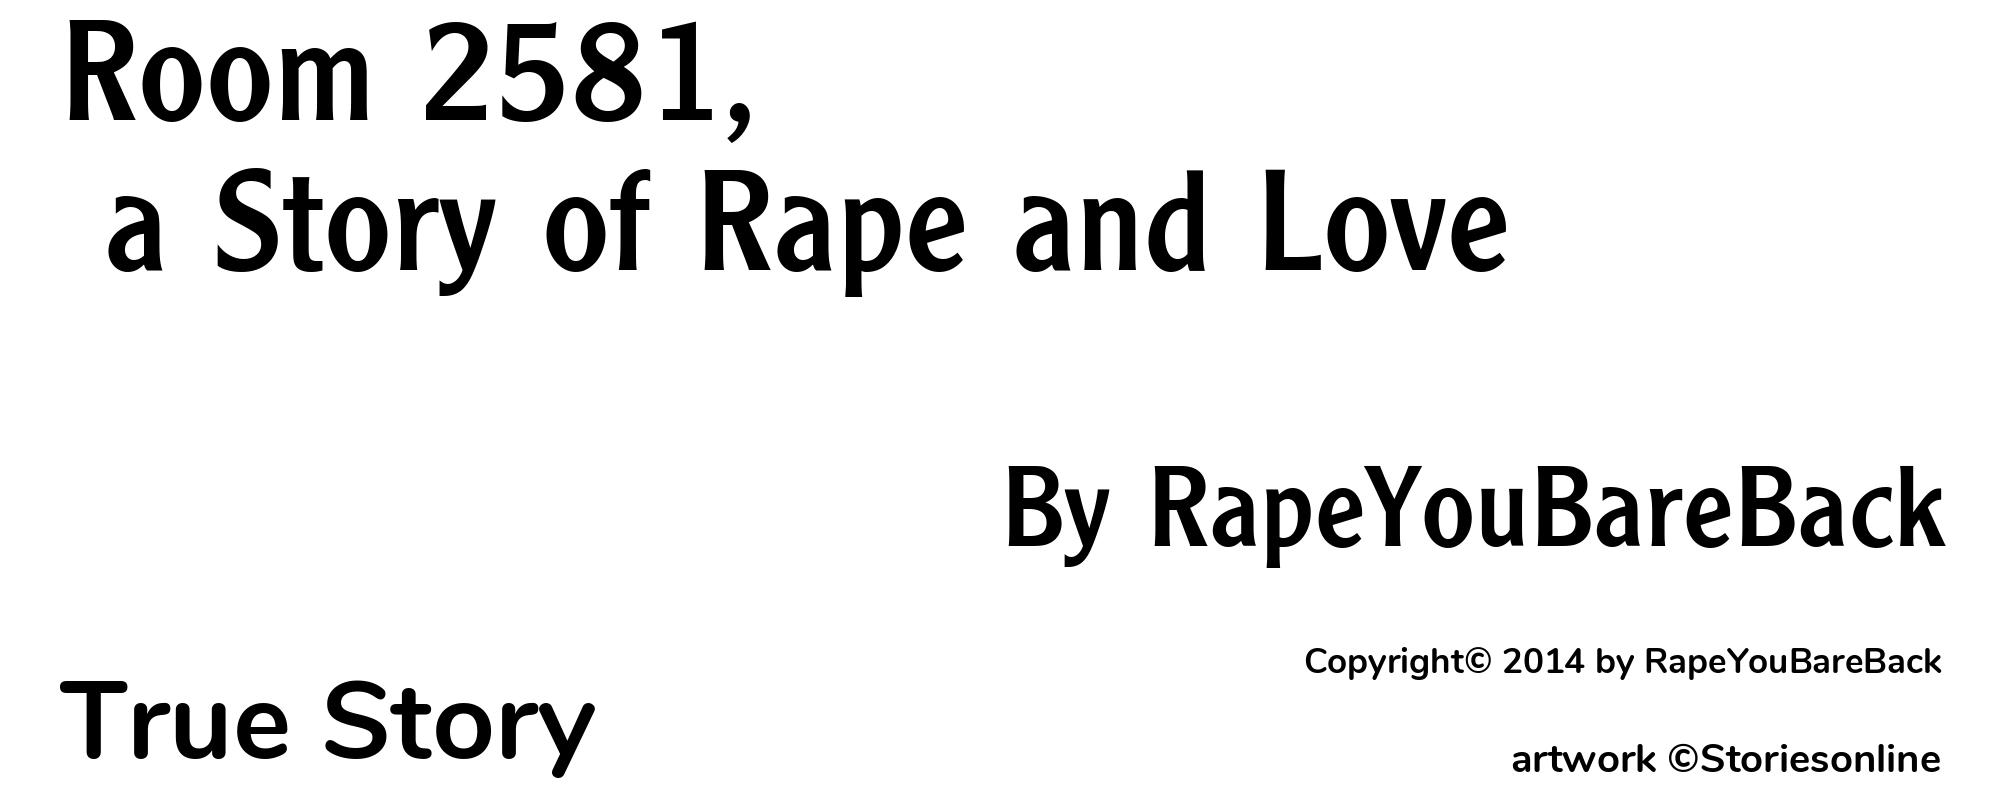 Room 2581, a Story of Rape and Love - Cover